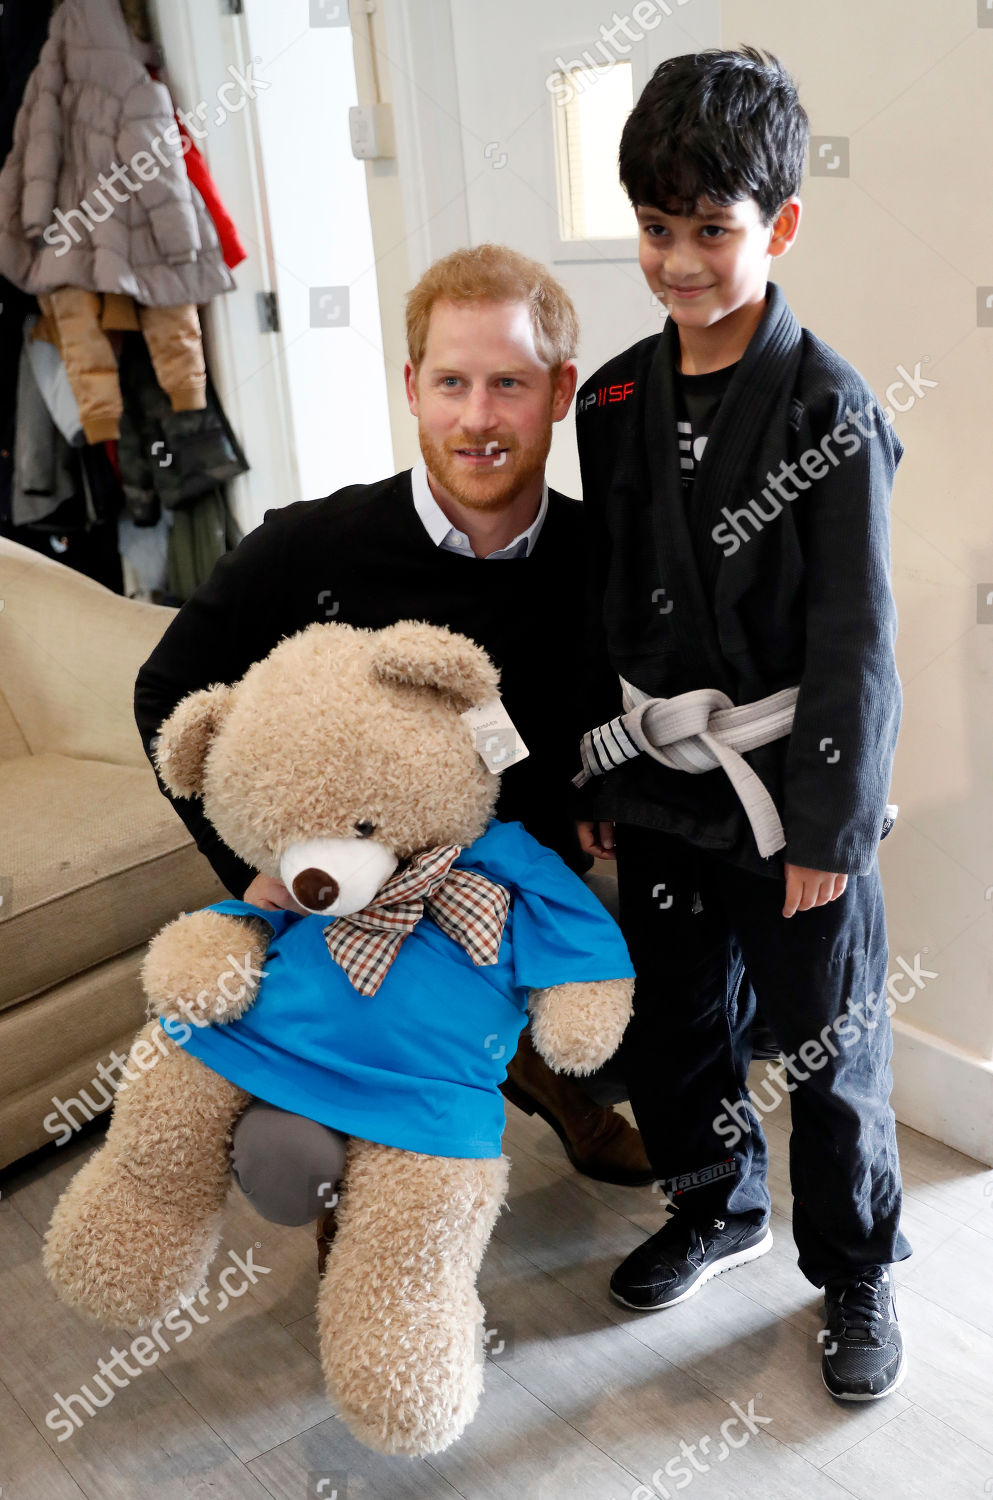 prince-harry-visit-to-fit-and-fed-half-term-initiative-streatham-london-uk-shutterstock-editorial-10110713z.jpg